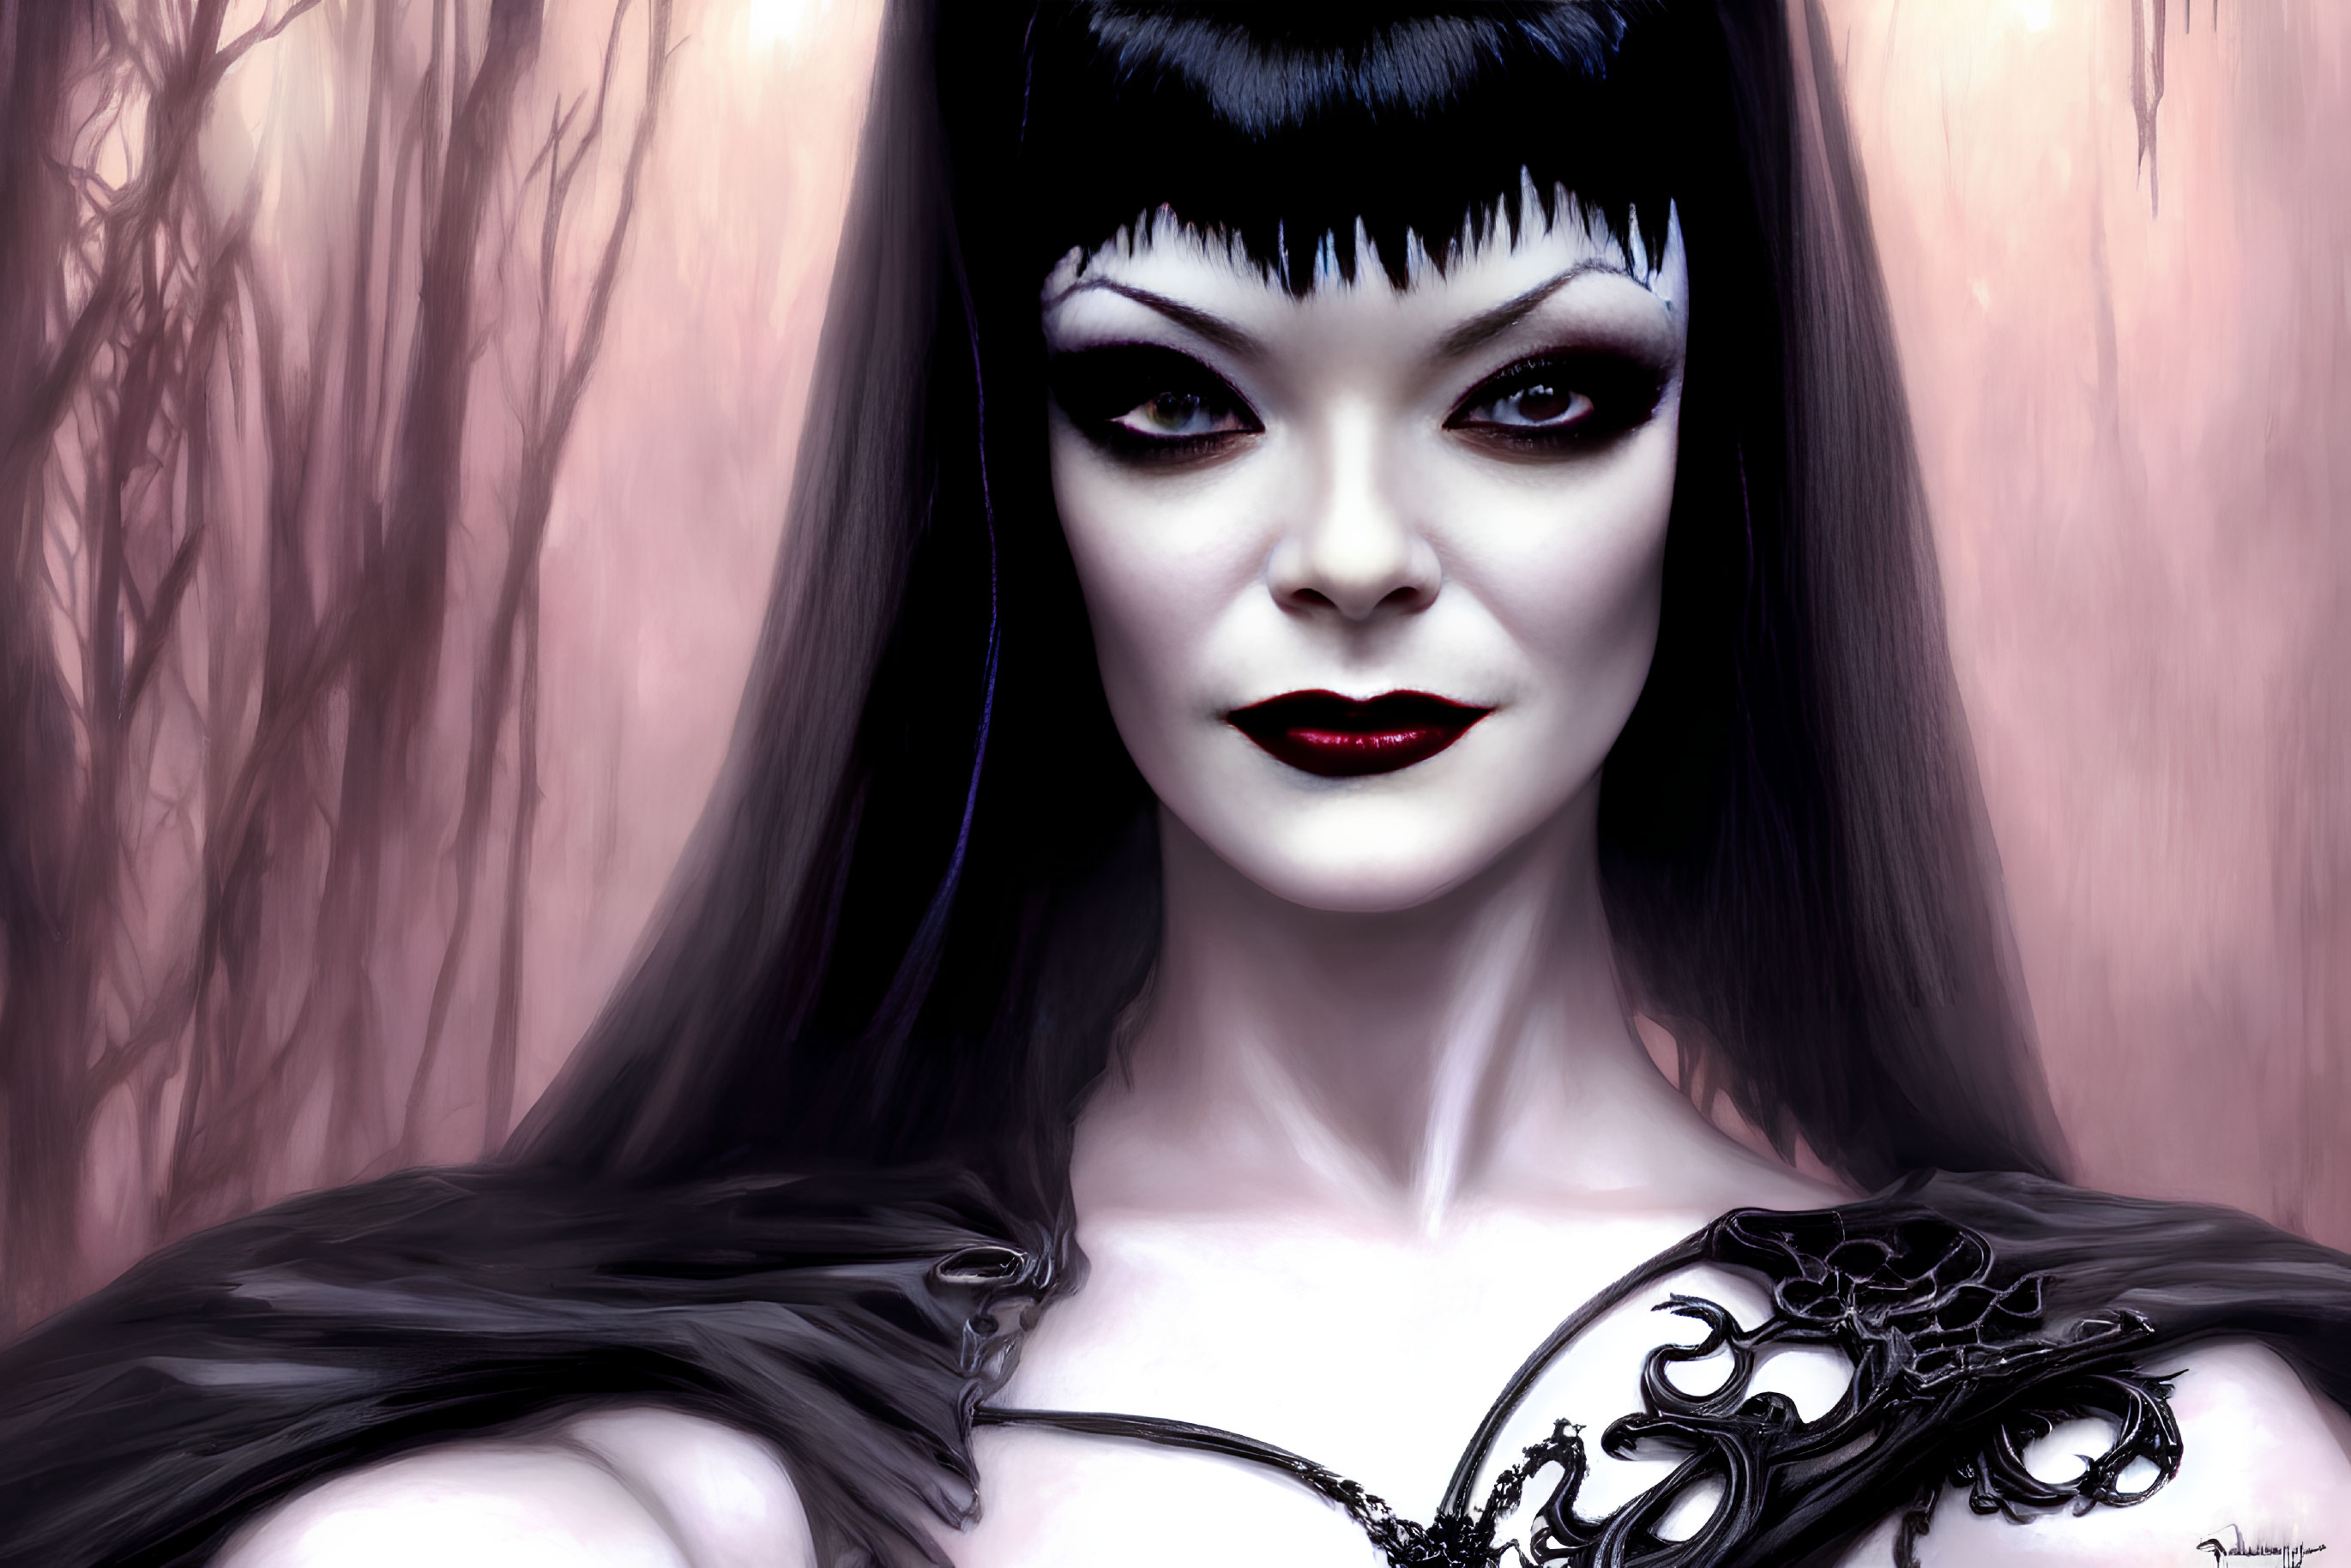 Digital painting of pale woman with black hair in dark outfit against surreal forest backdrop